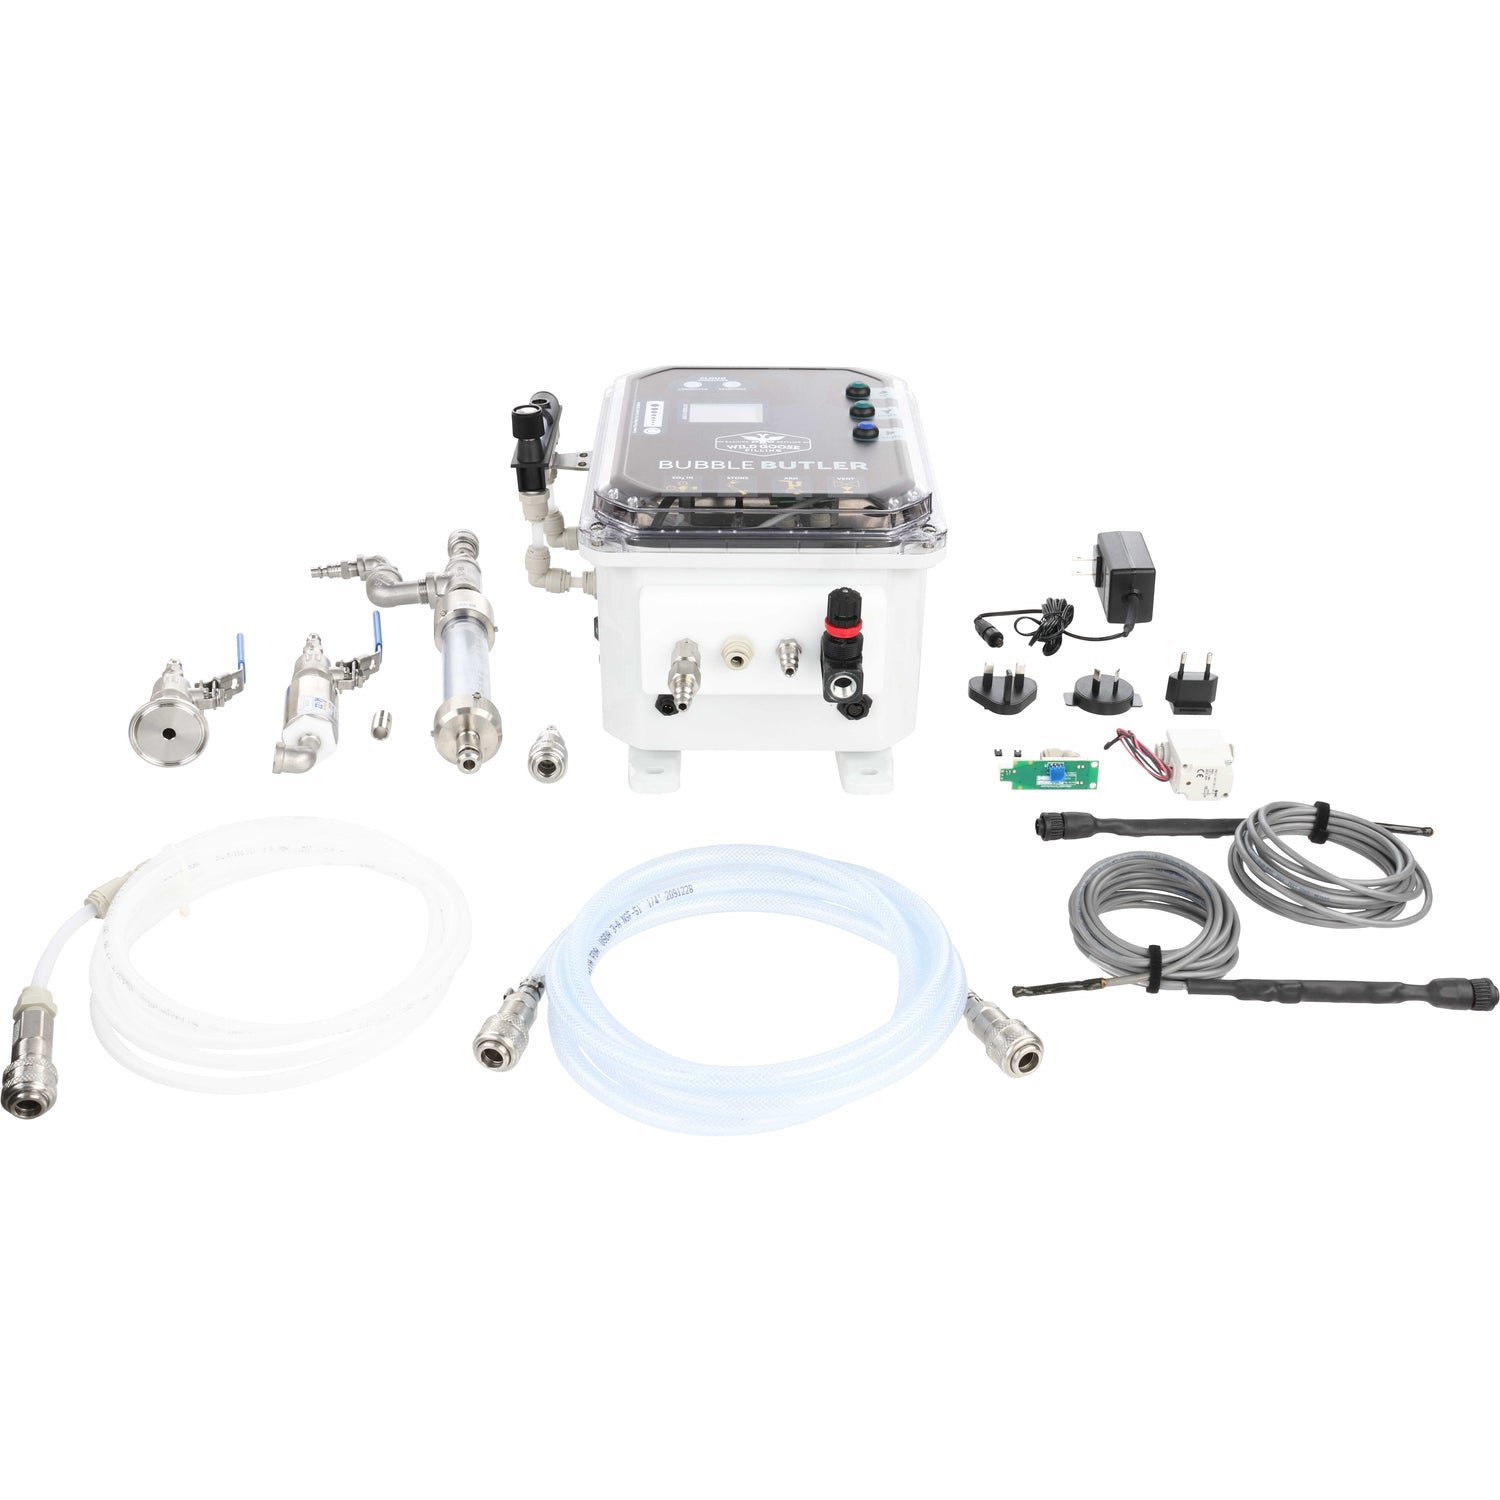 An assortment of Bubble Butler parts shown on a white background that include pipe fittings and fasteners, tubing, temp sensors, solenoids and plug adapters.